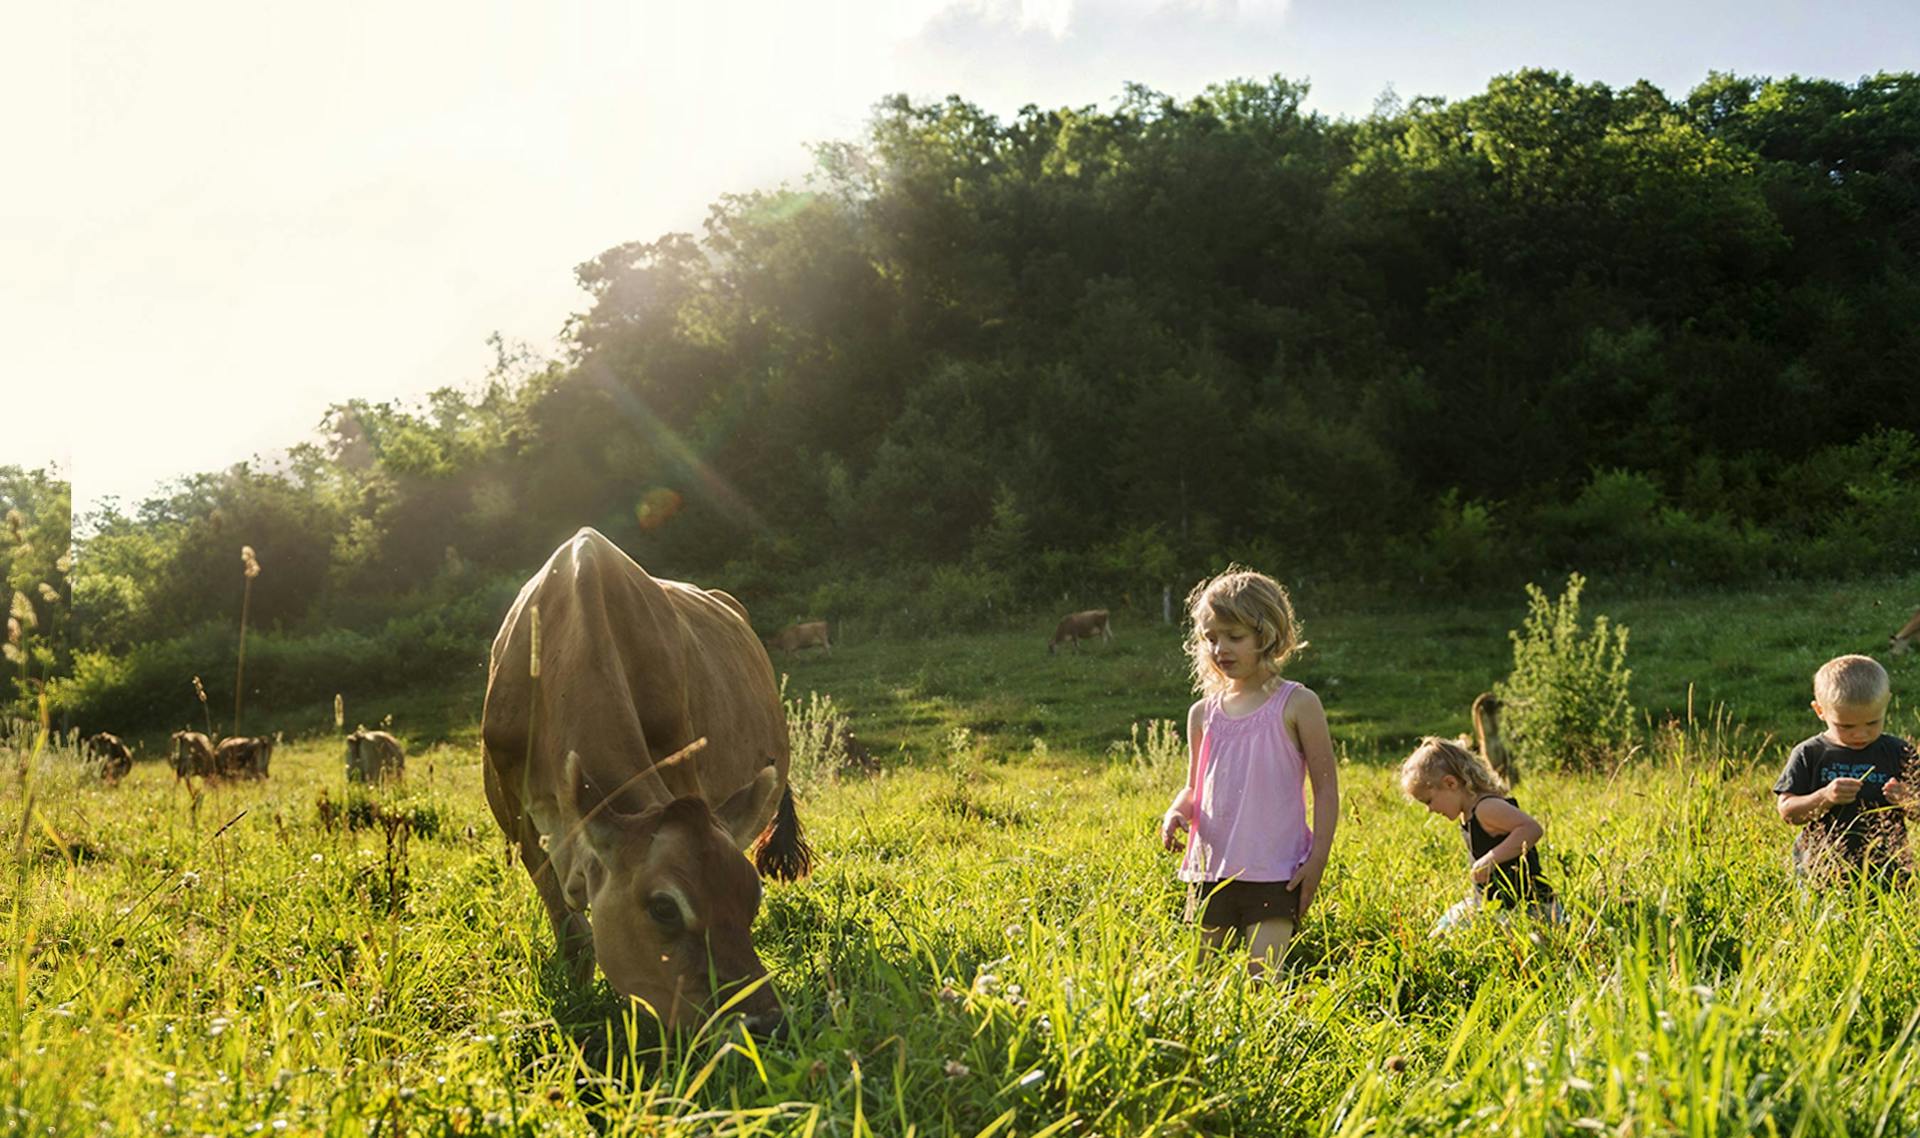 Three children playin gin the field next to a cow grazing.